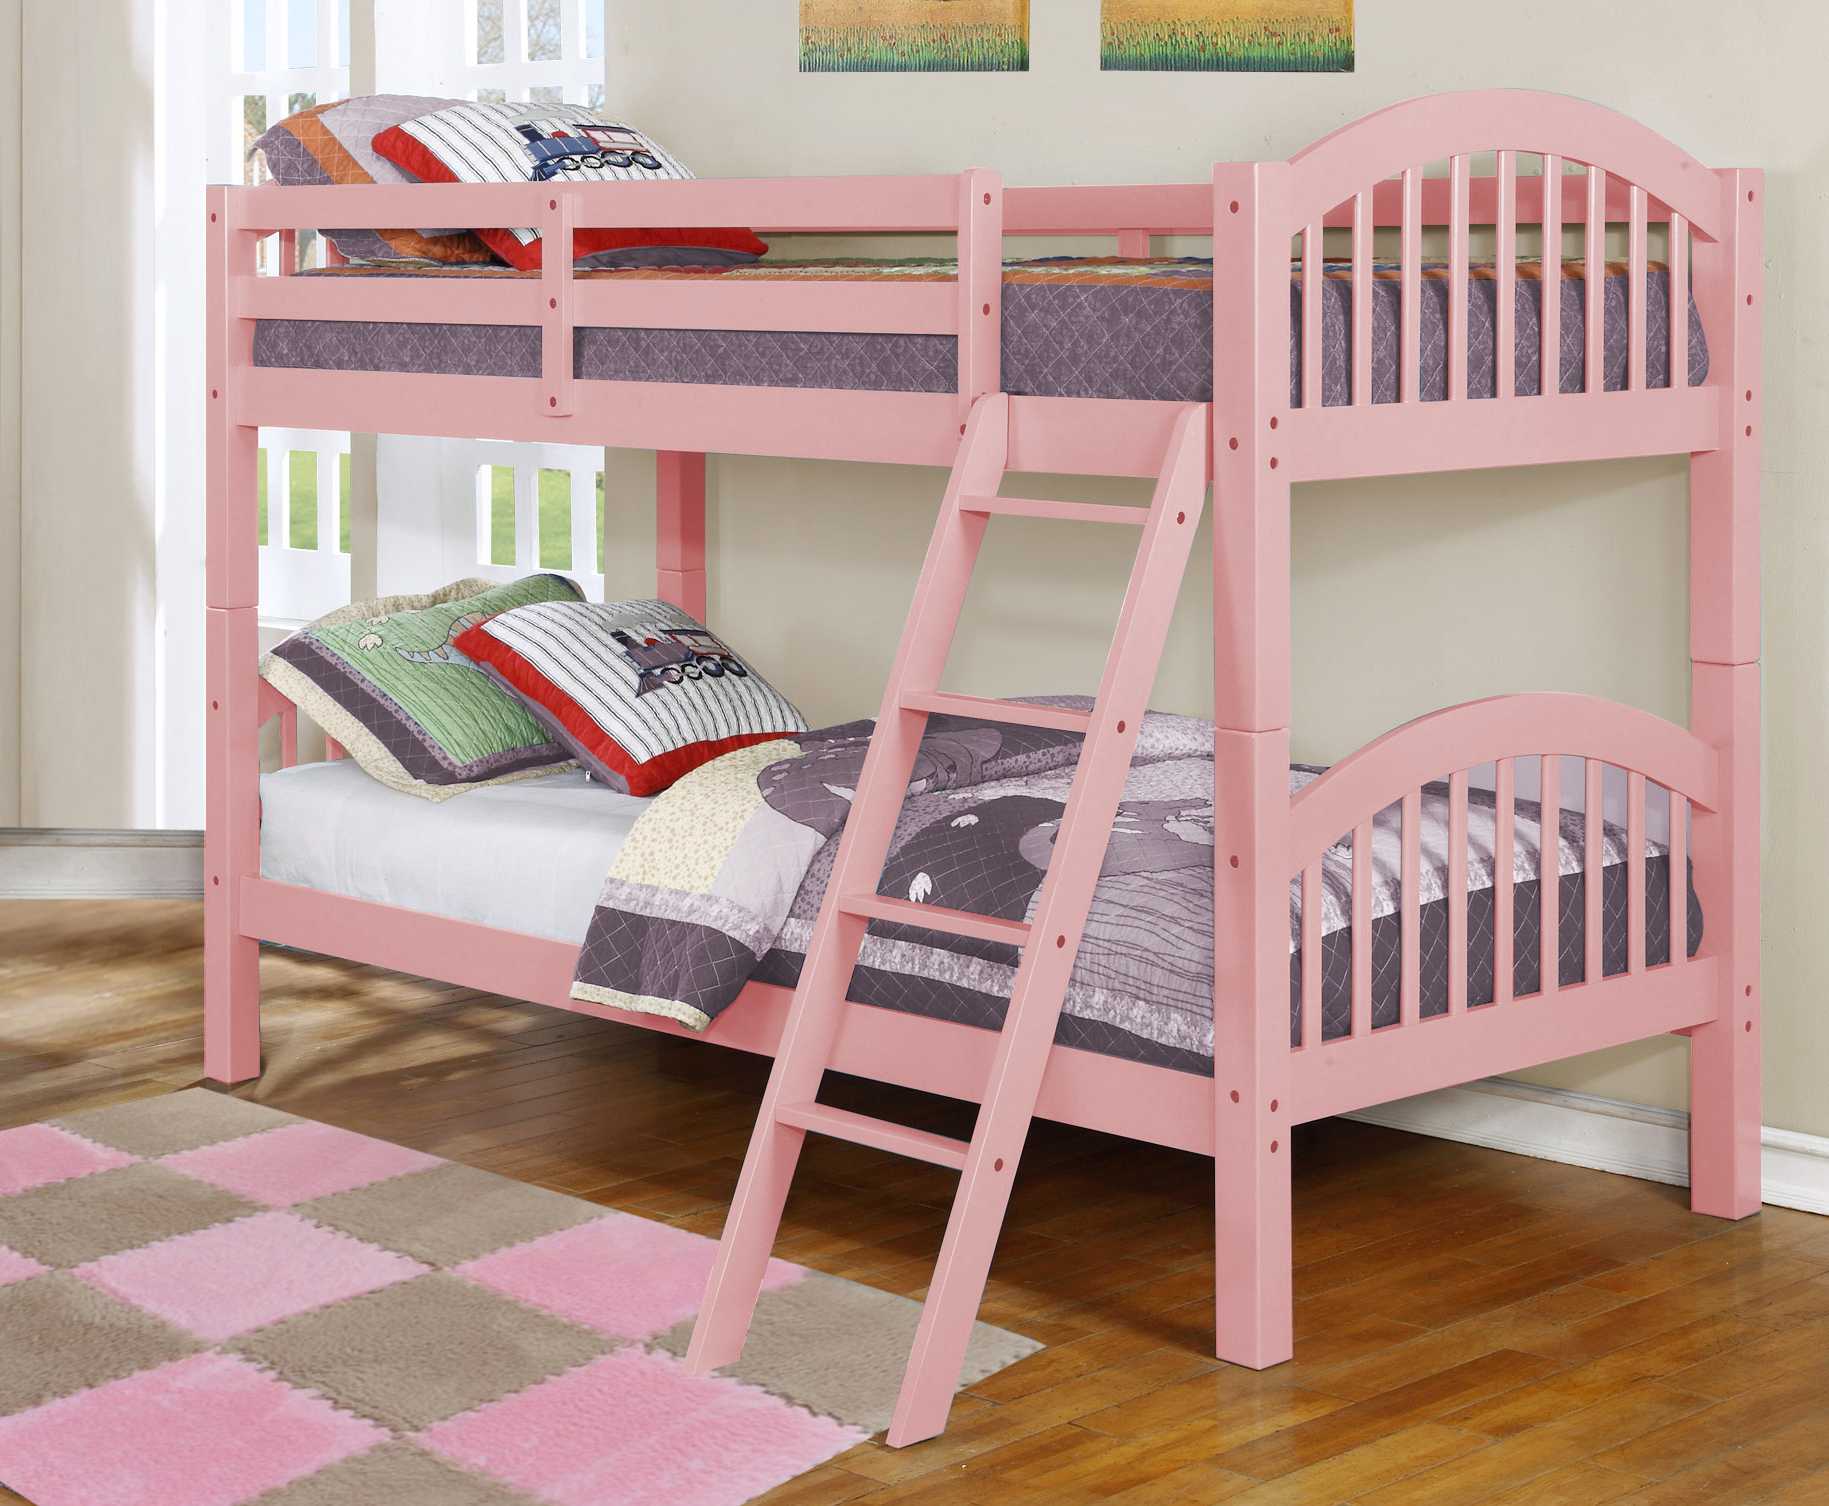 81.25" X 42.5" X 62.5" Pink Solid and Manufactured Wood Twin or Twin Arched Wood Bunk Bed